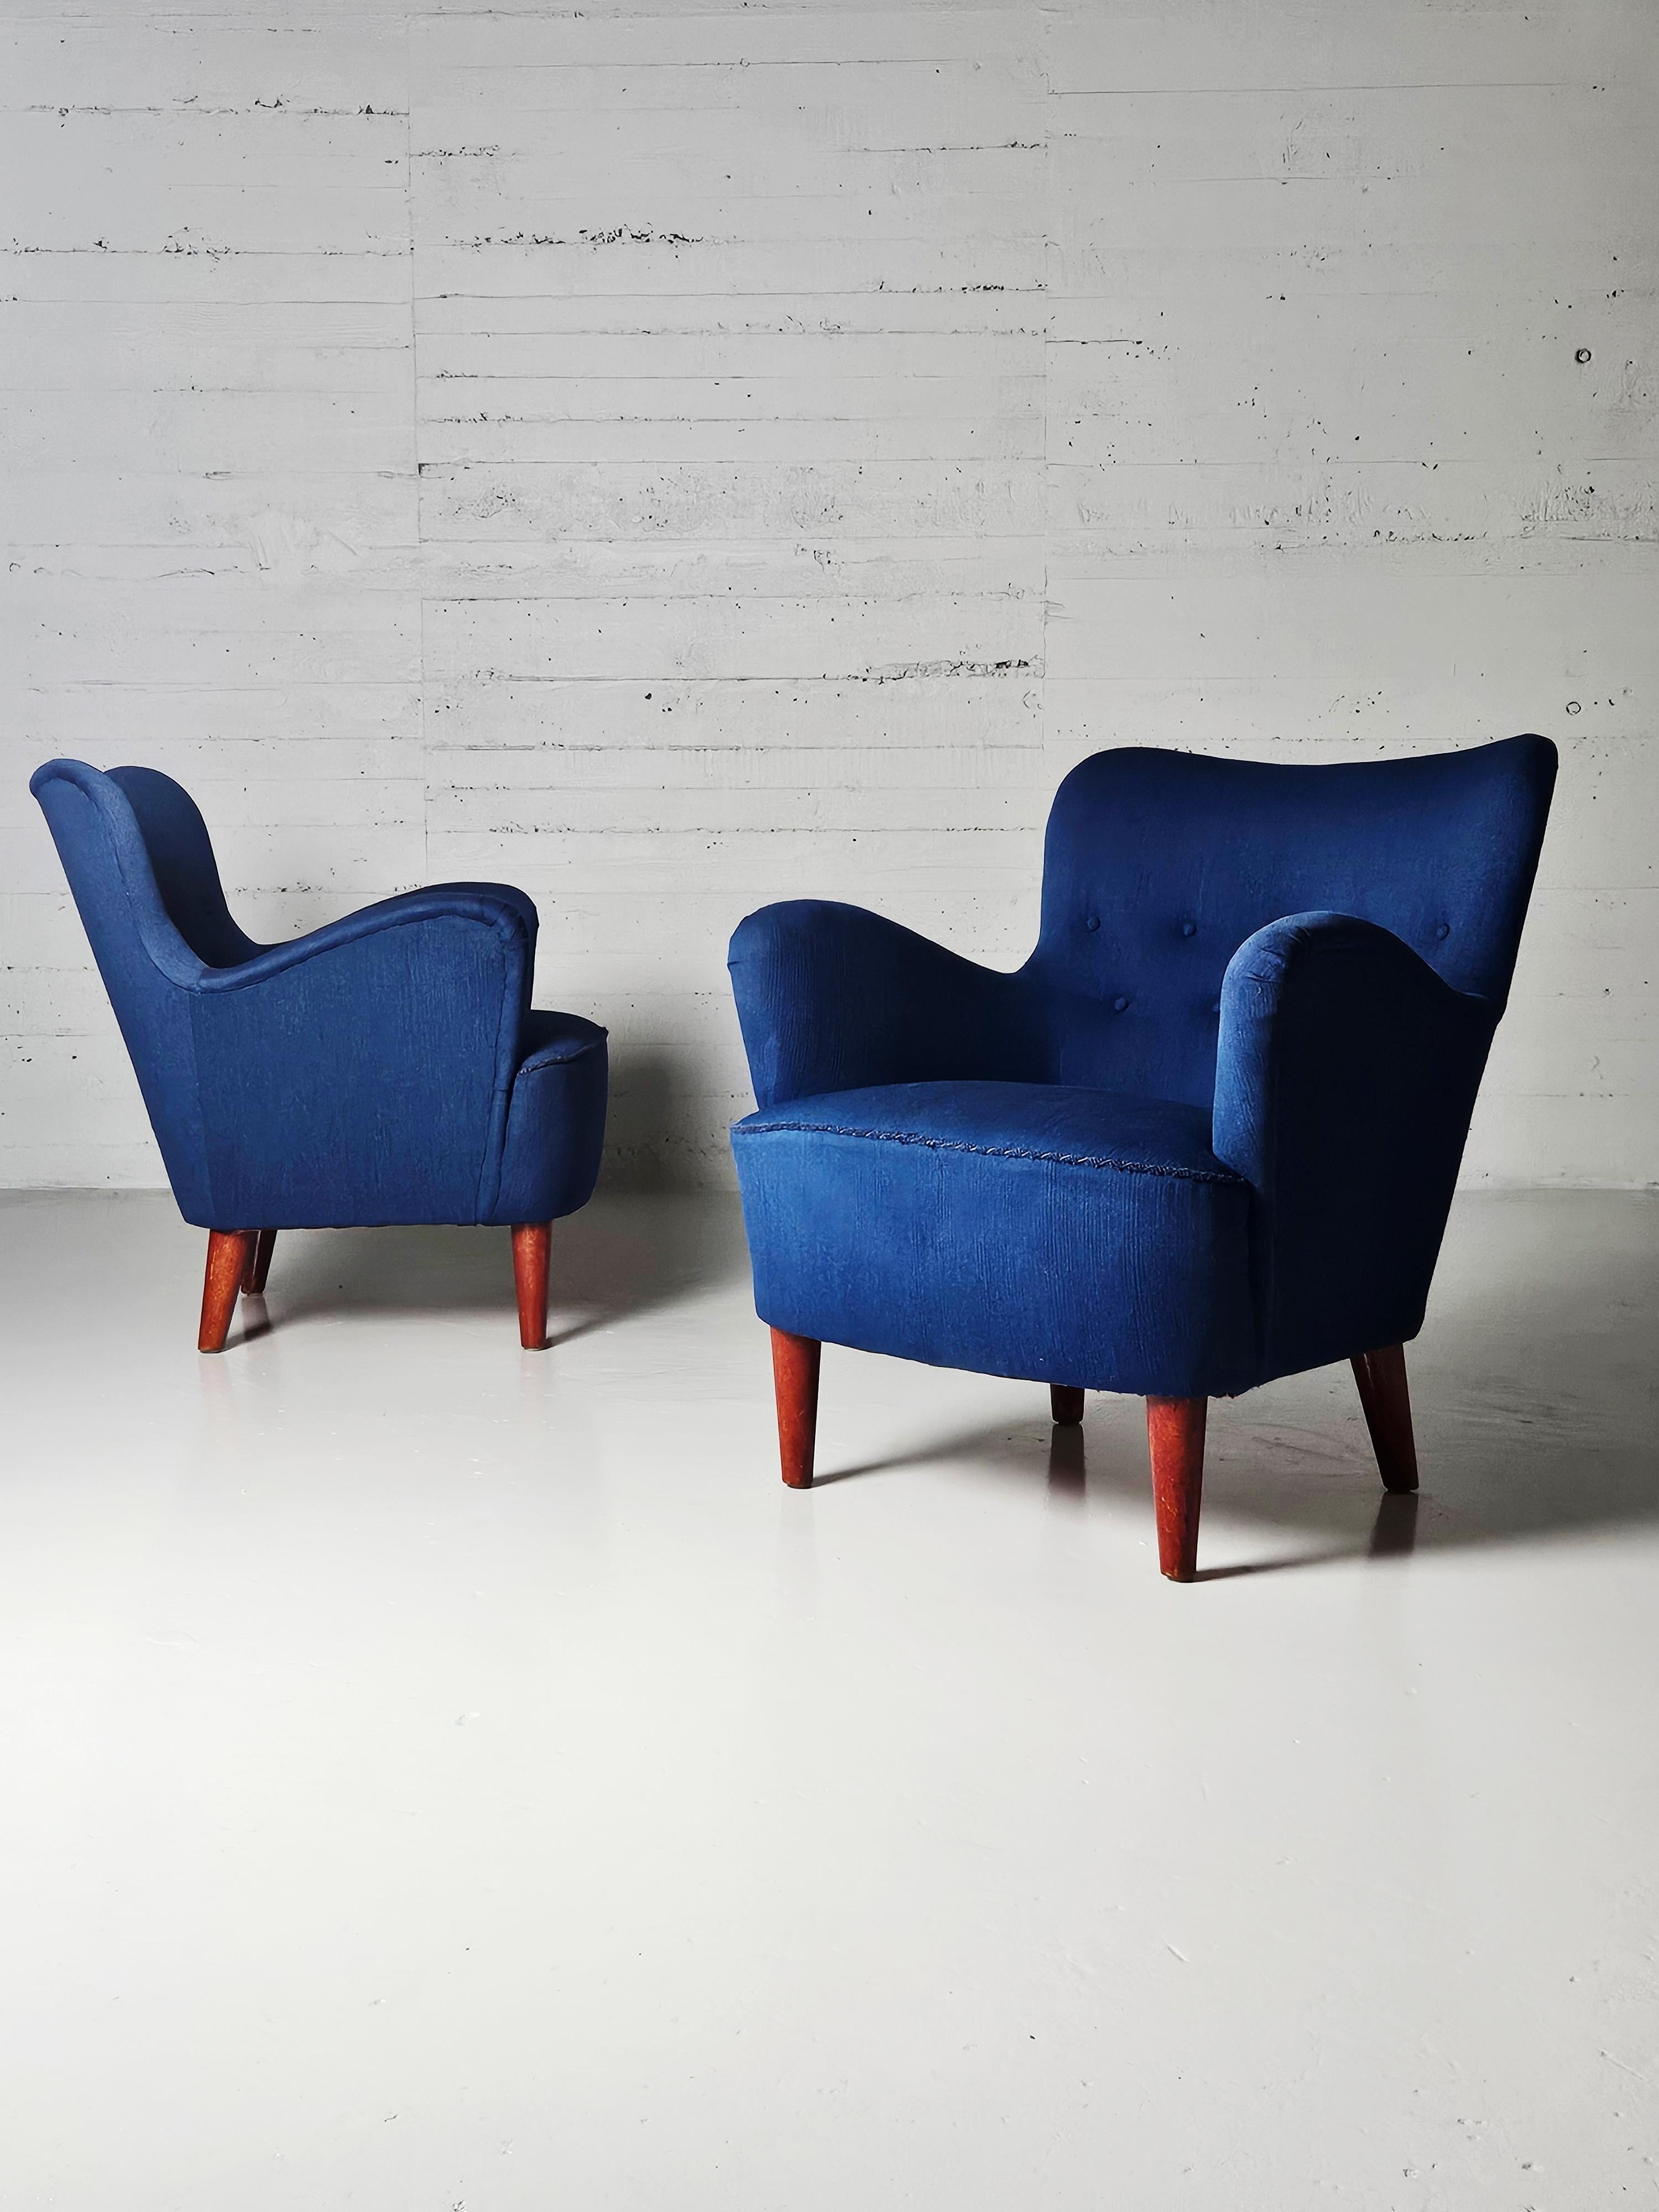 Swedish modern armchairs by anonymous designer from the 1960s. 

Legs of stained beech and upholstered in a beautiful blue fabric. Generous armrests.